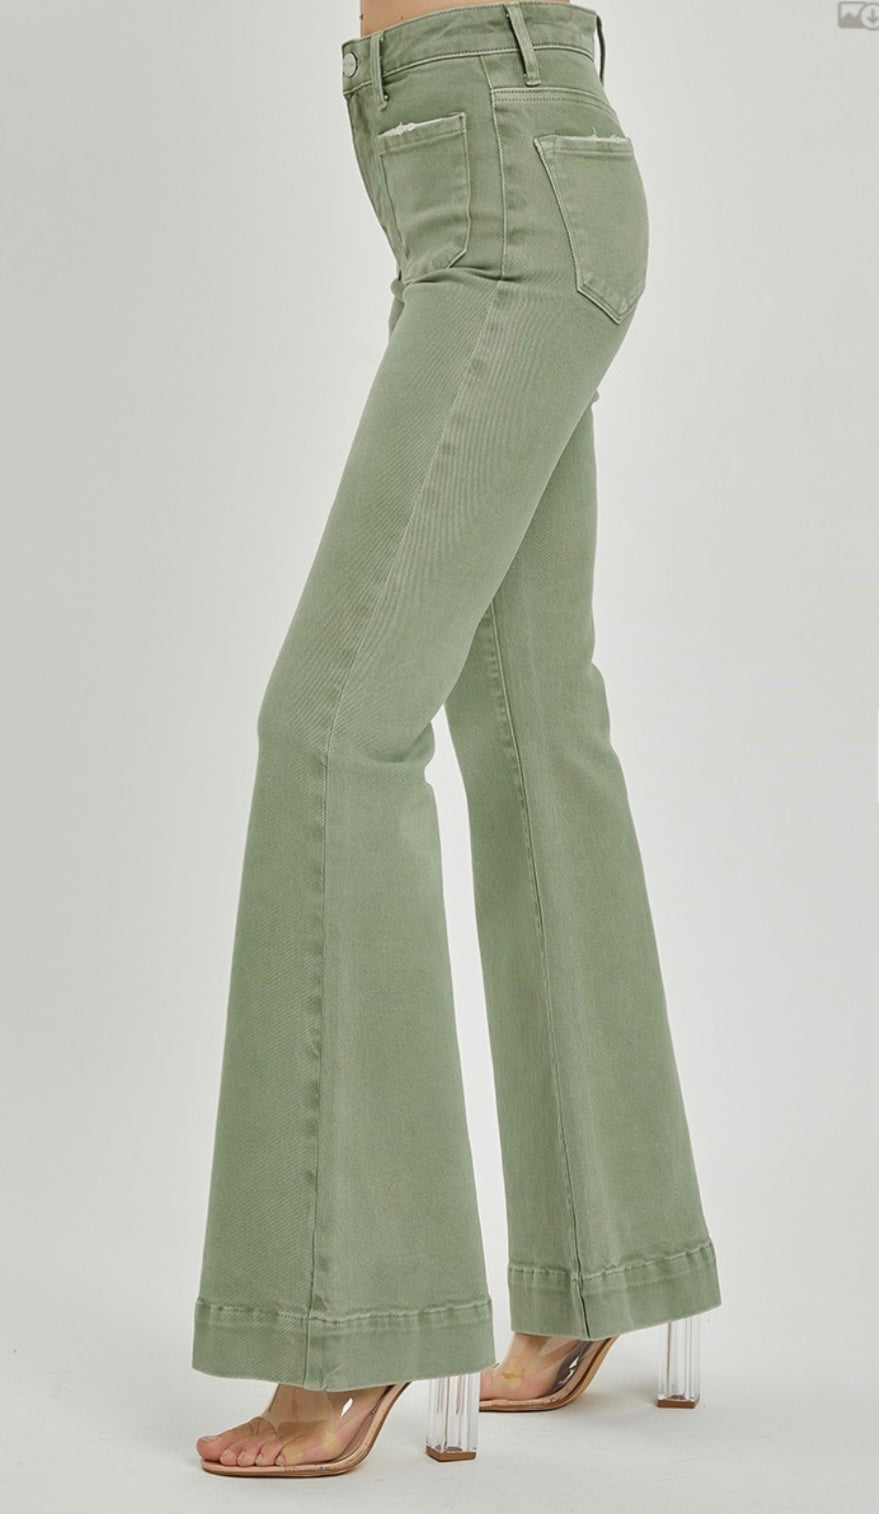 Olive High Rise Front Patch Pocket Jeans w/ Bell Bottom Leg